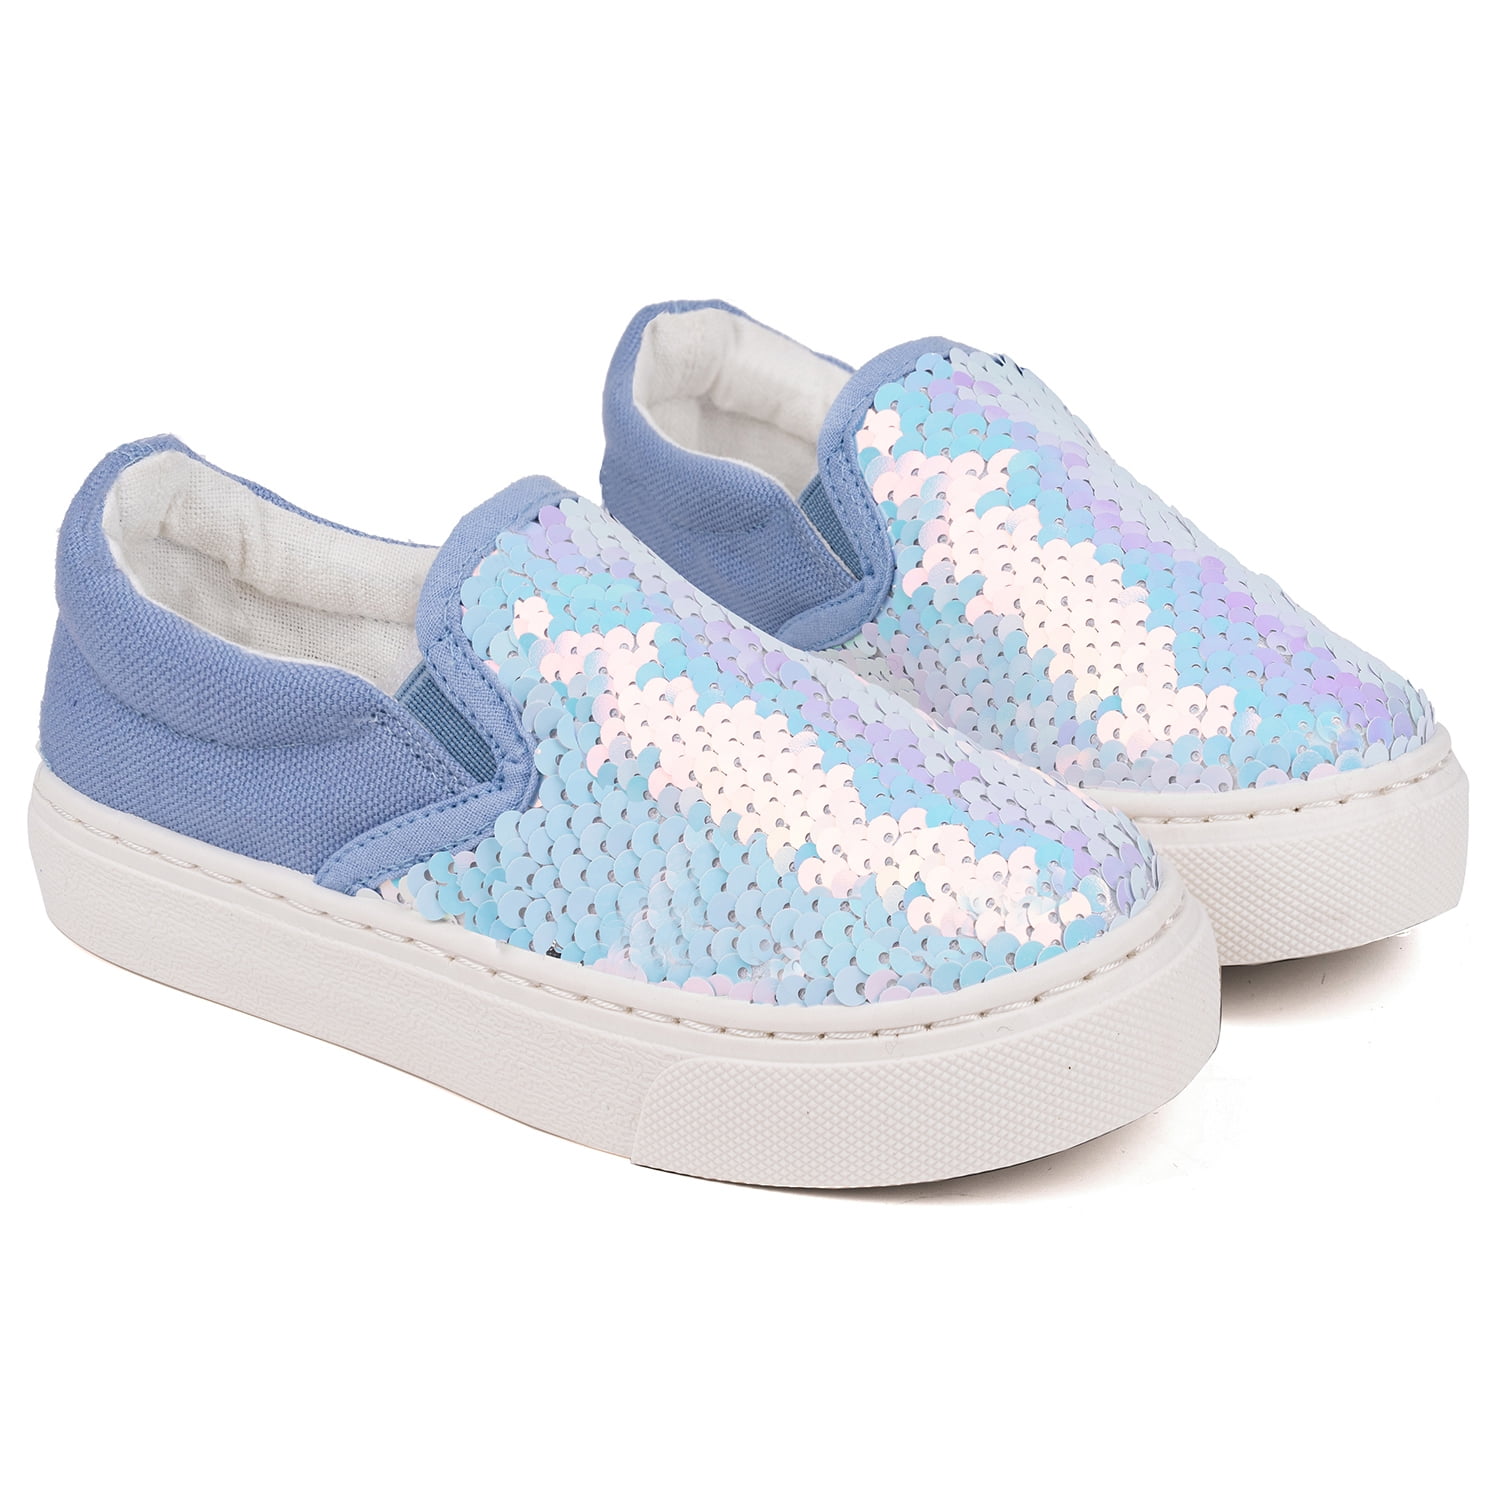 Toandon Sparkle Color Change Flipping Sequins High Top Casual Canvas Shoes for Kids 